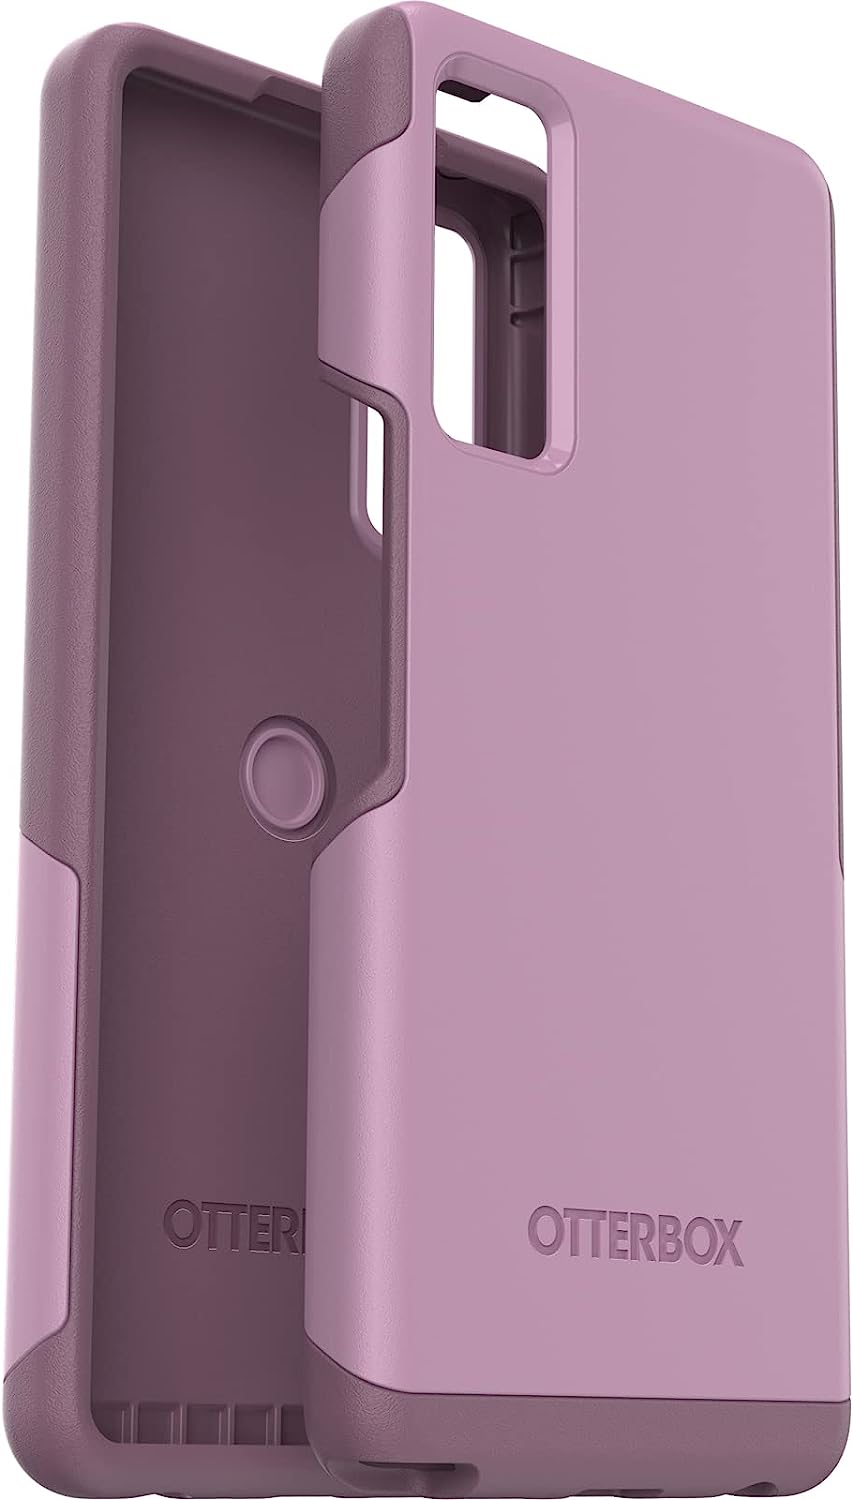 OtterBox COMMUTER LITE SERIES Case for TCL Stylus 5G - Maven Way (New)